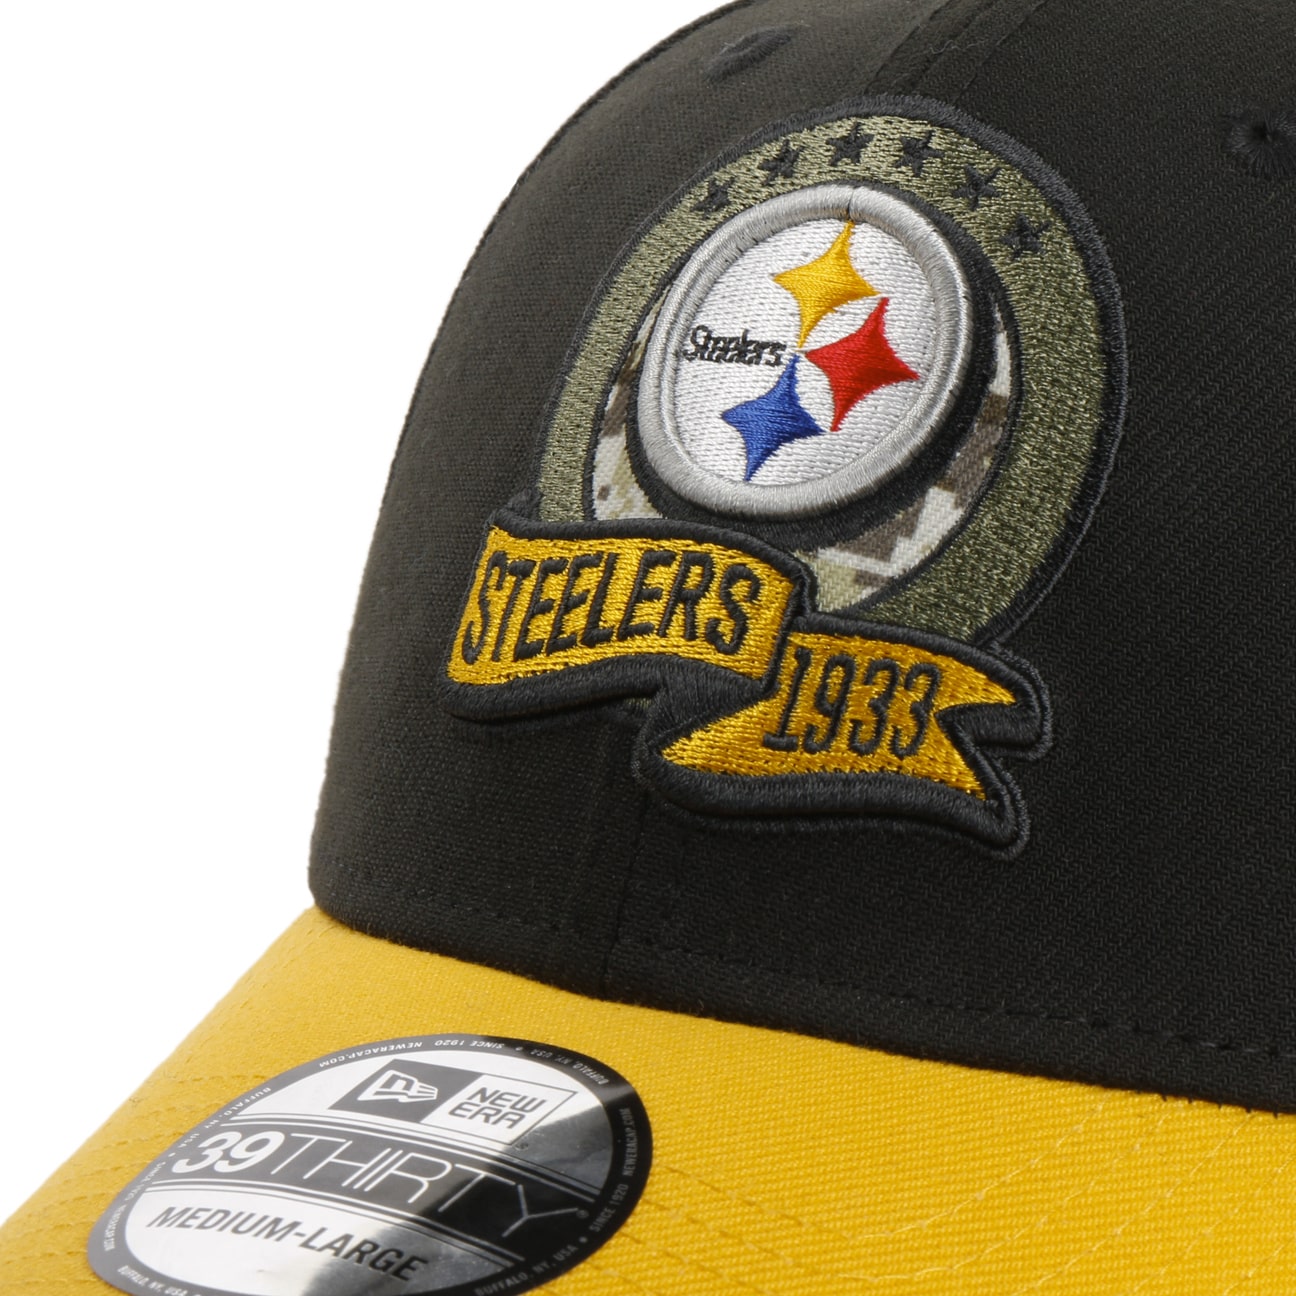 Casquette 39Thirty NFL STS 22 Steelers by New Era - 35,95 €